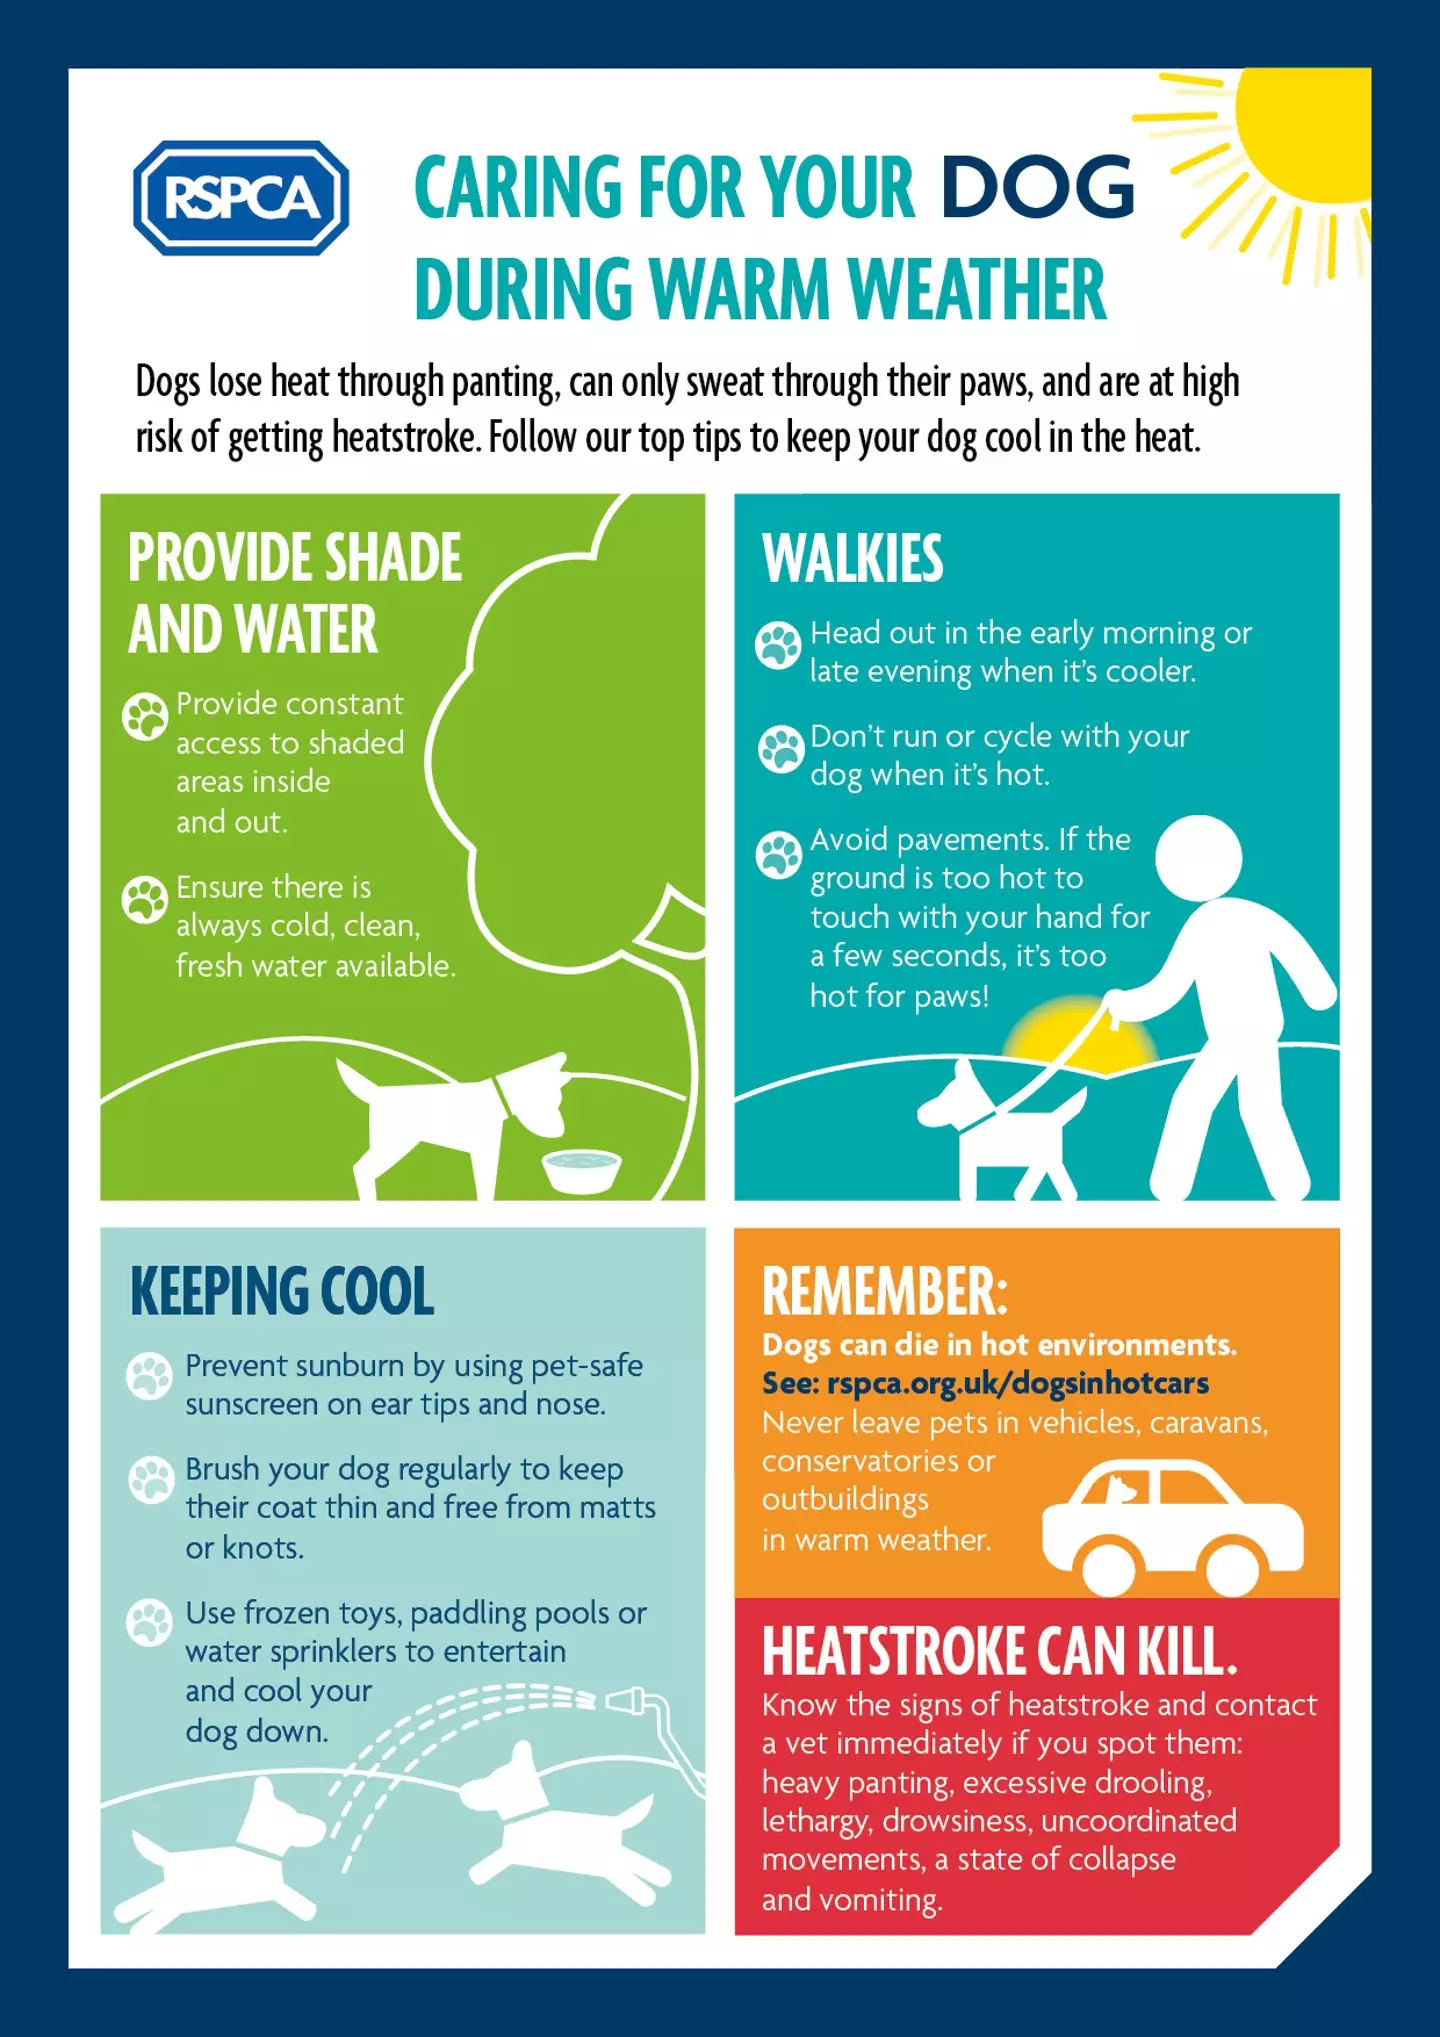 The RSPCA has given advice on how to take care of your dog in warmer weather.